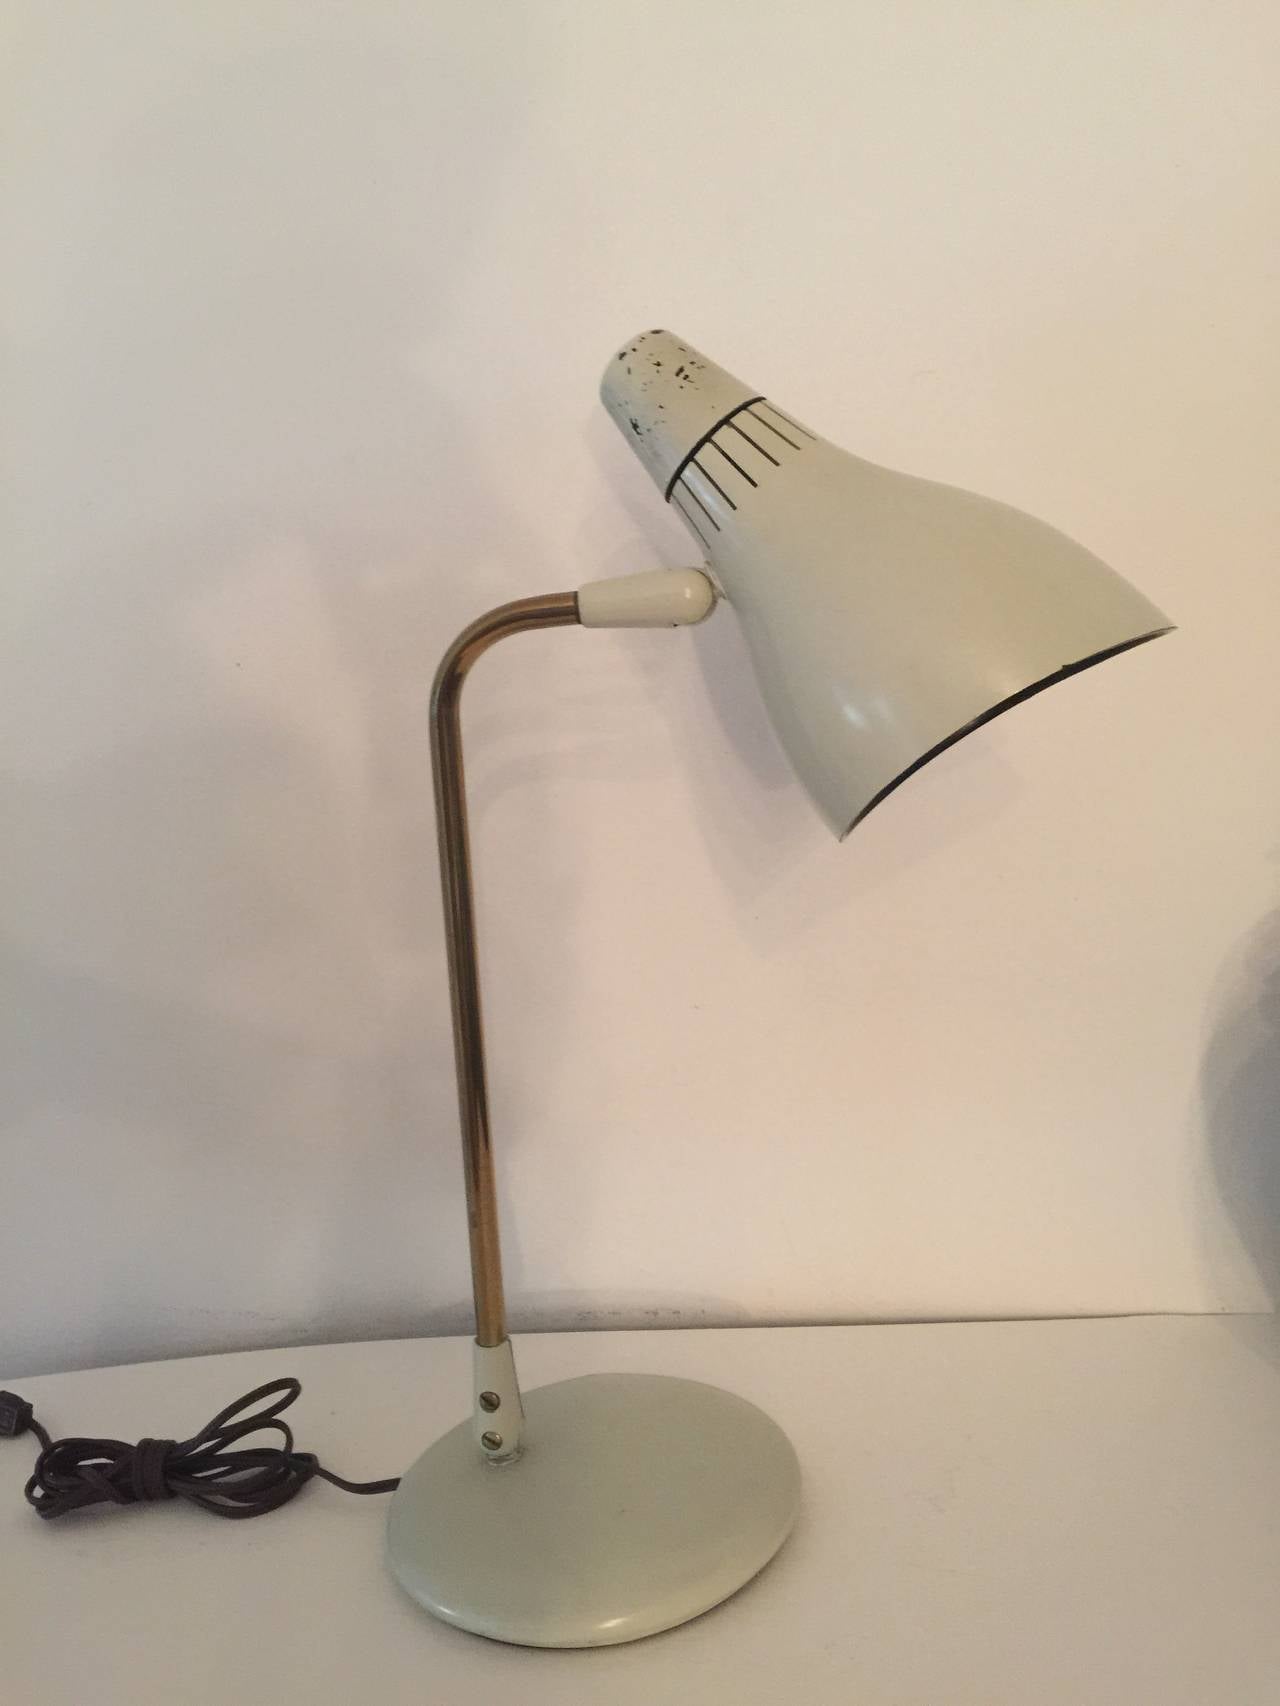 Bone white metal and brass desk lamp by Gerald Thurston for Lightolier, USA, circa 1960. Features a cone-shaped metal shade and round base with antiqued brass arm. Adjustable shade and arm. On/off switch is built into shade top. Wired for U.S.;